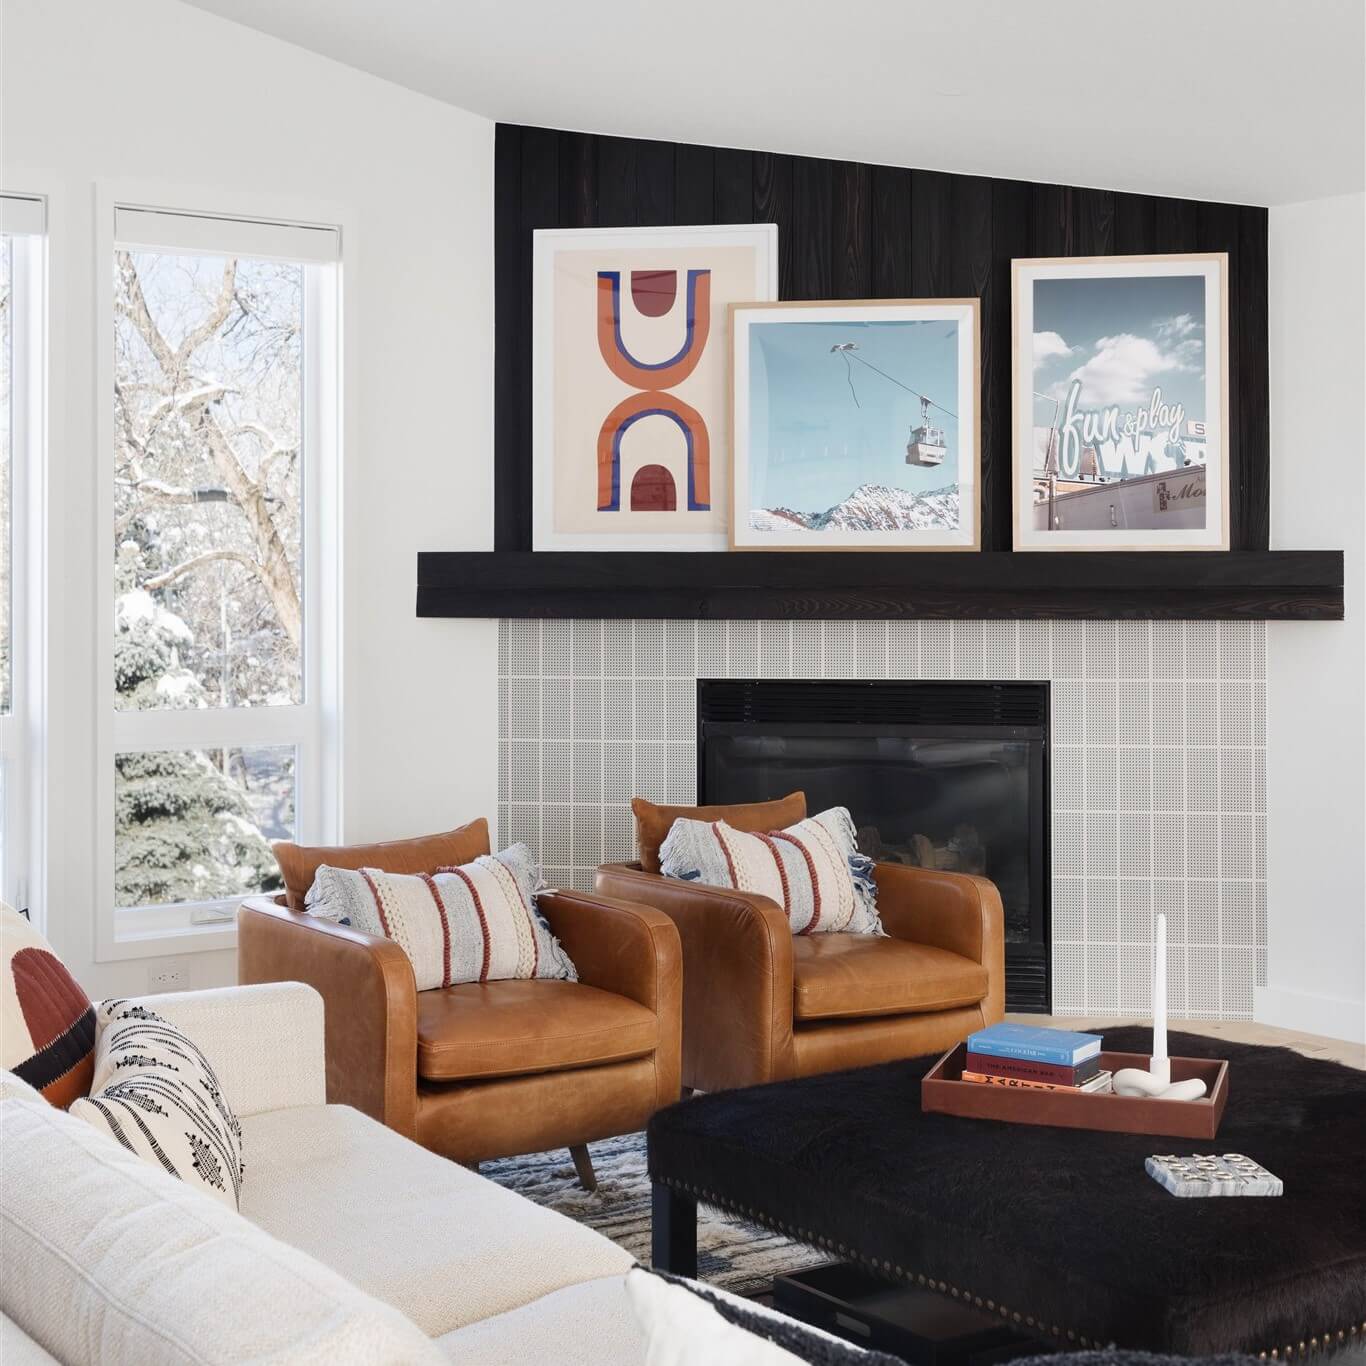 A living room with a fireplace and framed pictures.